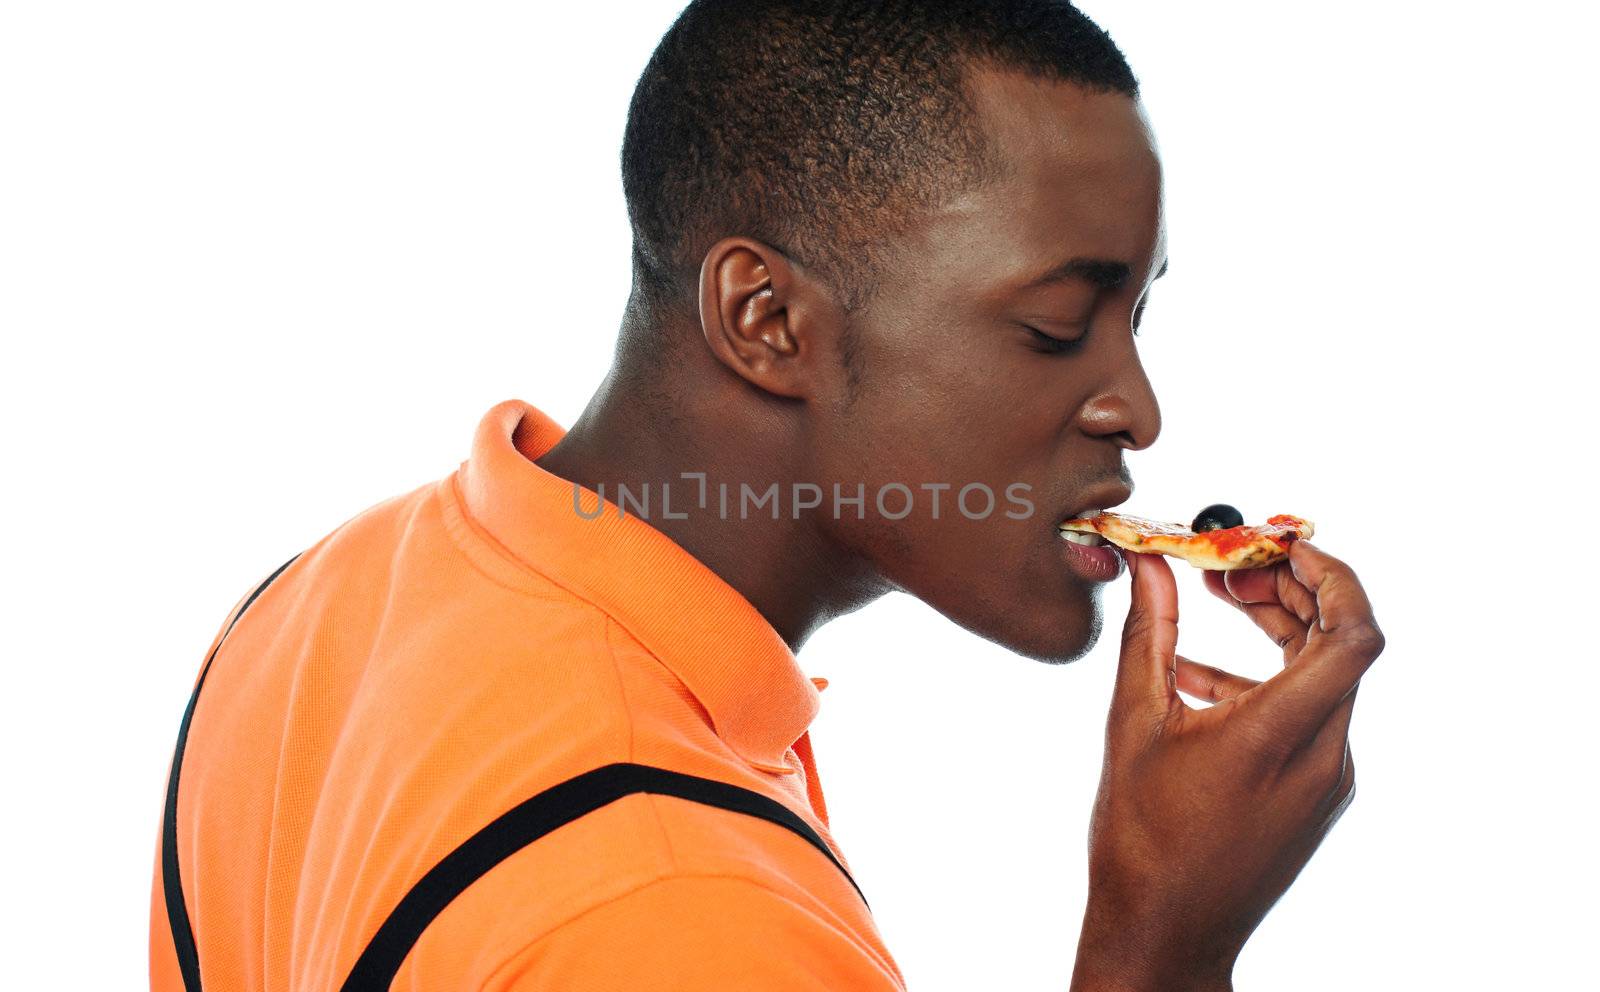 Closeup of a young man eating a slice of pizza